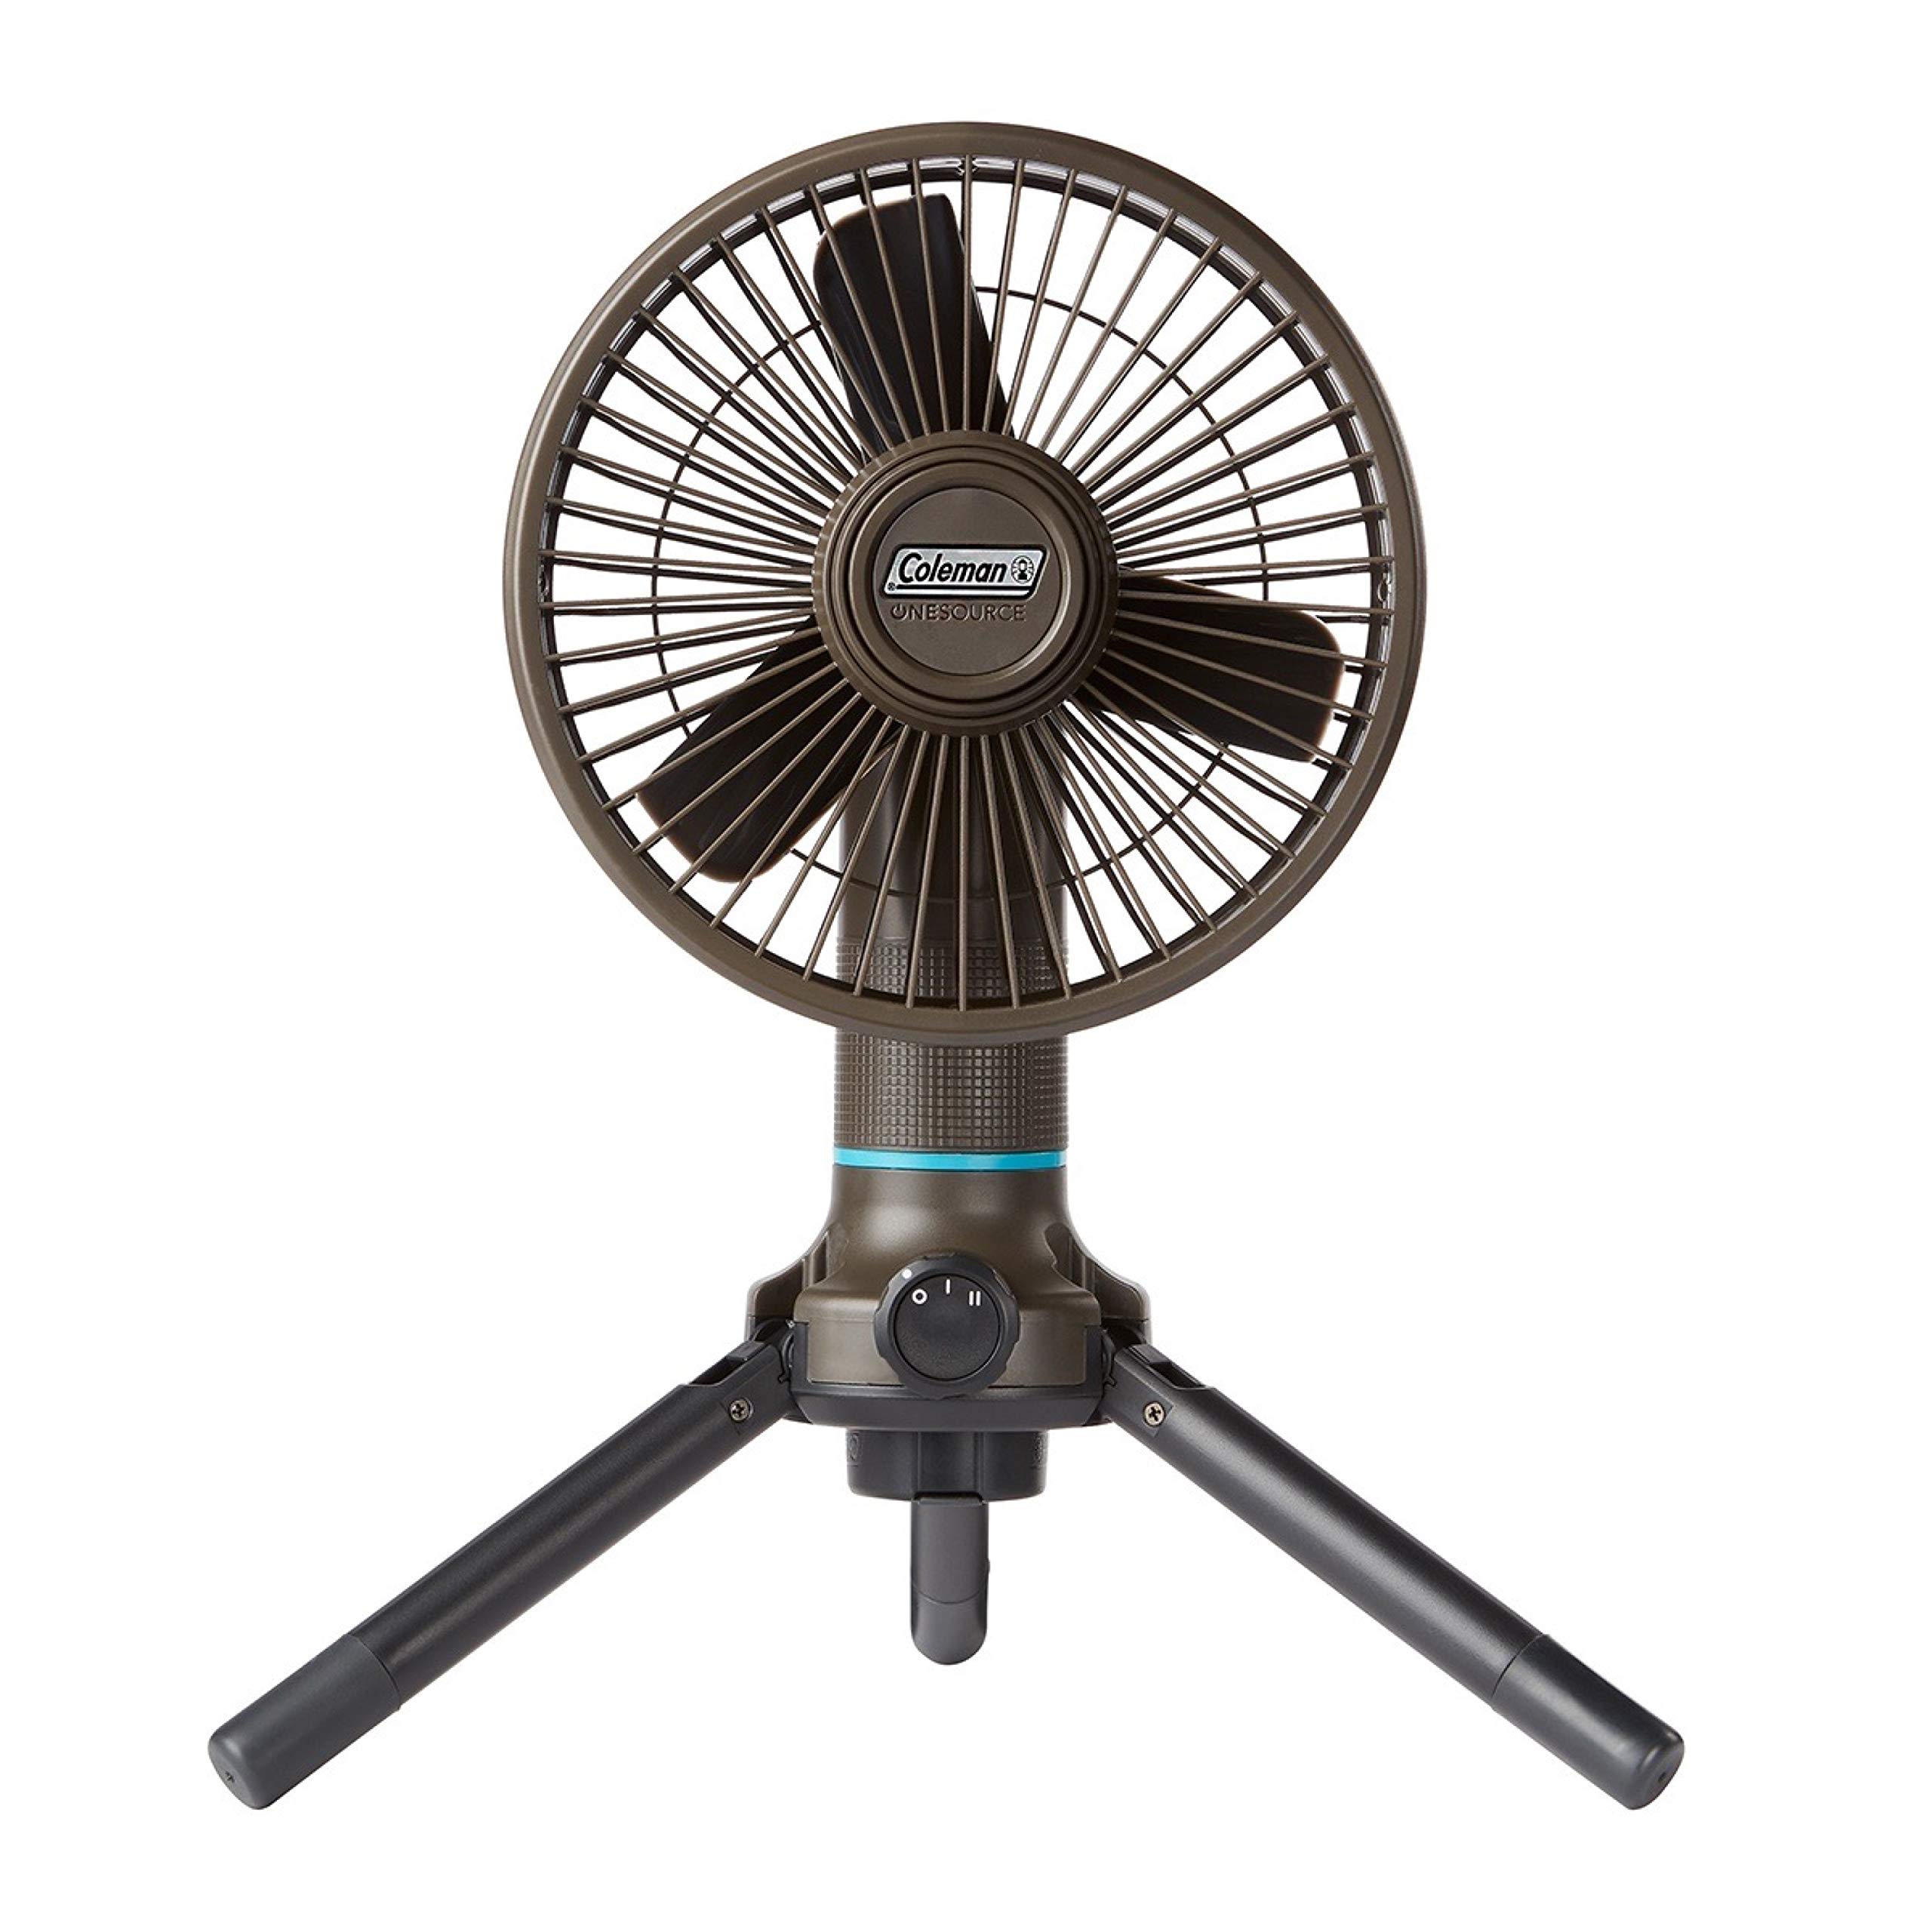 Coleman OneSource Rechargeable Outdoor Camping Fan $29 + Free Shipping w/ Prime or on orders $35+